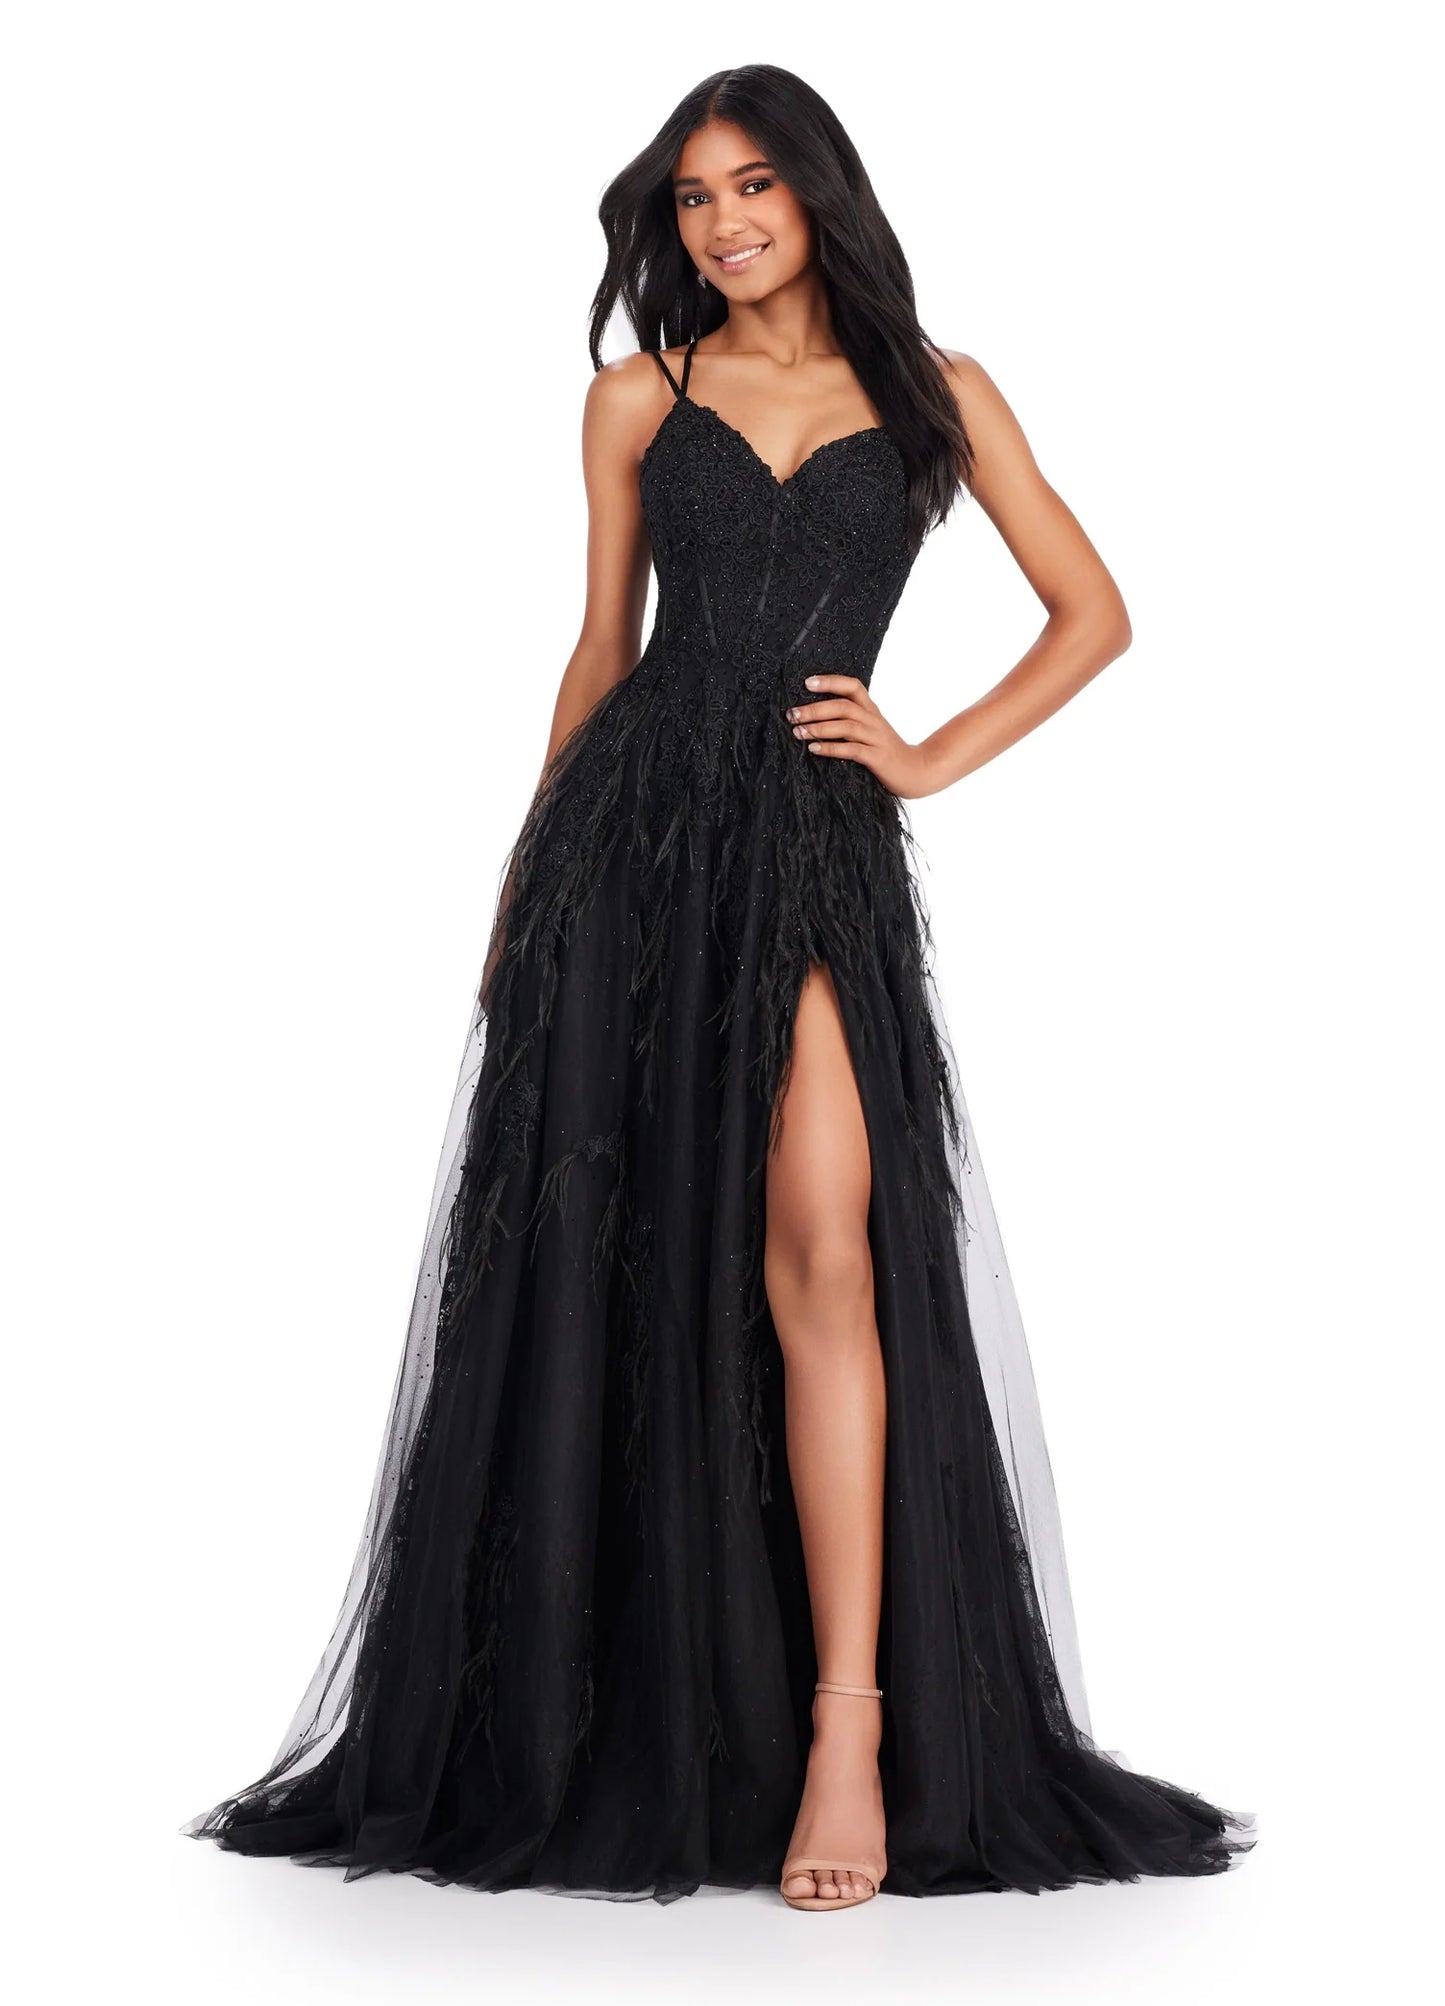 This Ashley Lauren 11480 dress is a stunningly unique piece for your next special event. Featuring intricate lace and feather detailing, a slim a-line fit with a thigh-high slit, a corset bodice, and an elegant low-back, this dress will be sure to draw attention. Perfect for prom, pageants, or any formal occasion. 